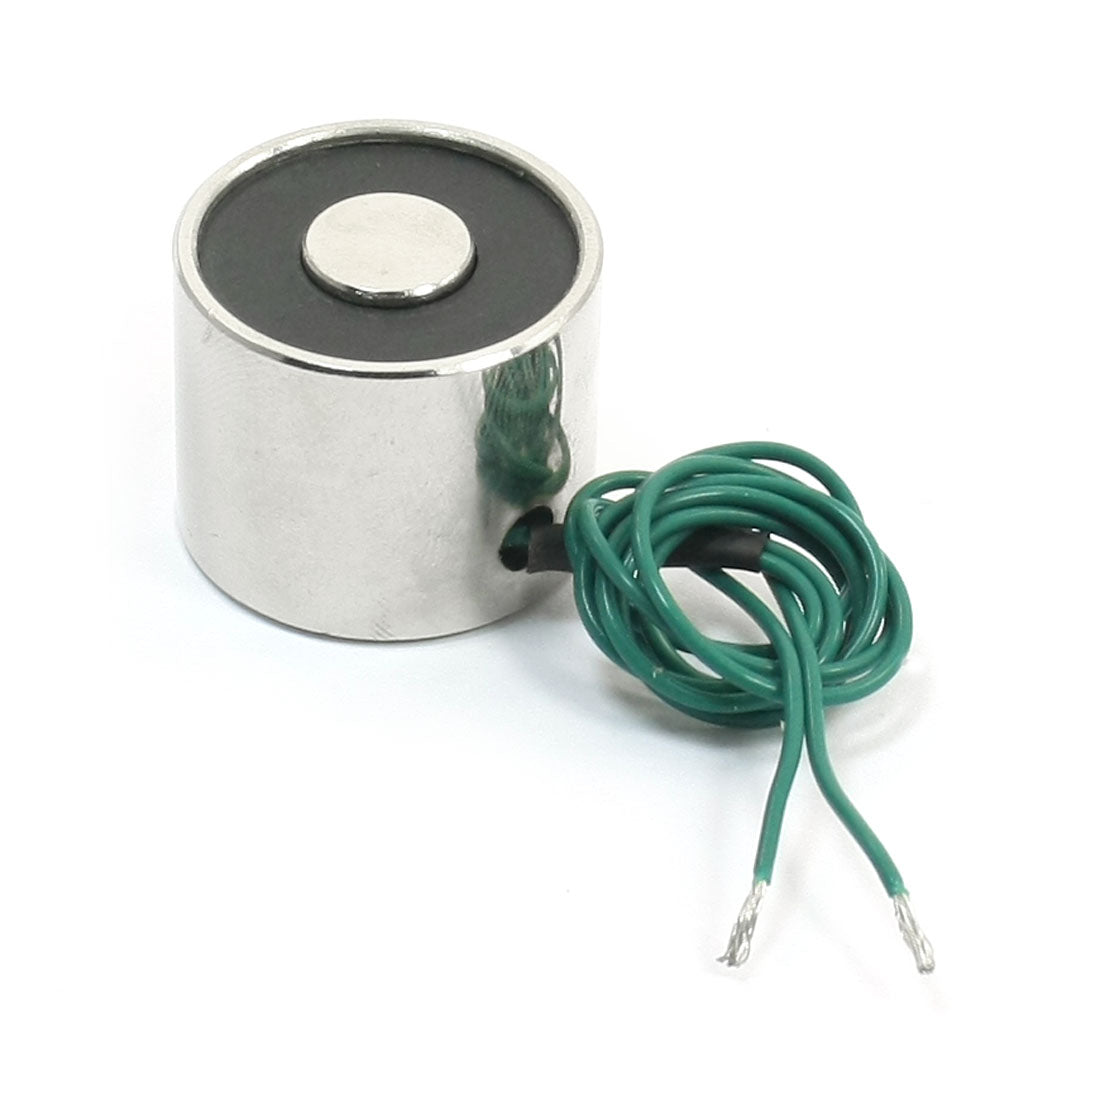 uxcell Uxcell 5Kg/11Lb 4mm Thread Dia Lifting Magnet Electromagnet Solenoid DC12V